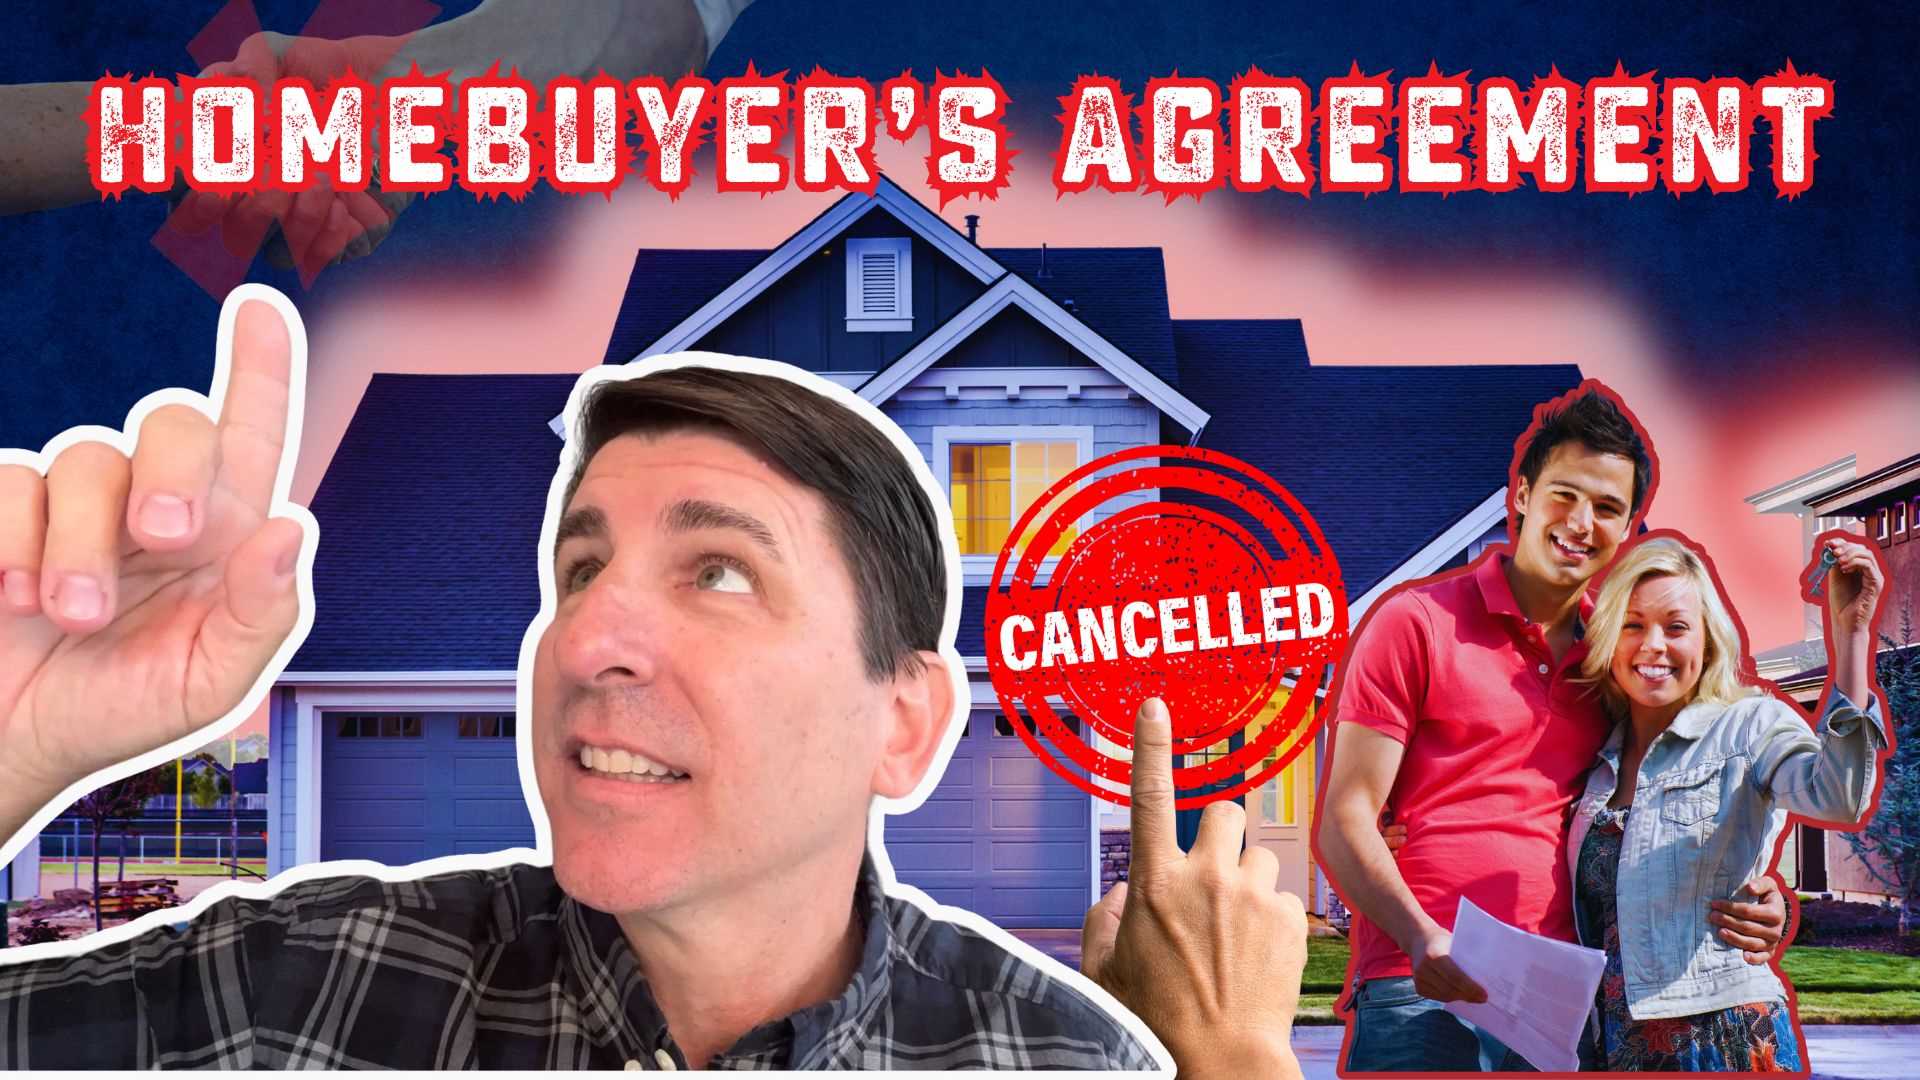 How to Cancel a Homebuyer’s Agreement